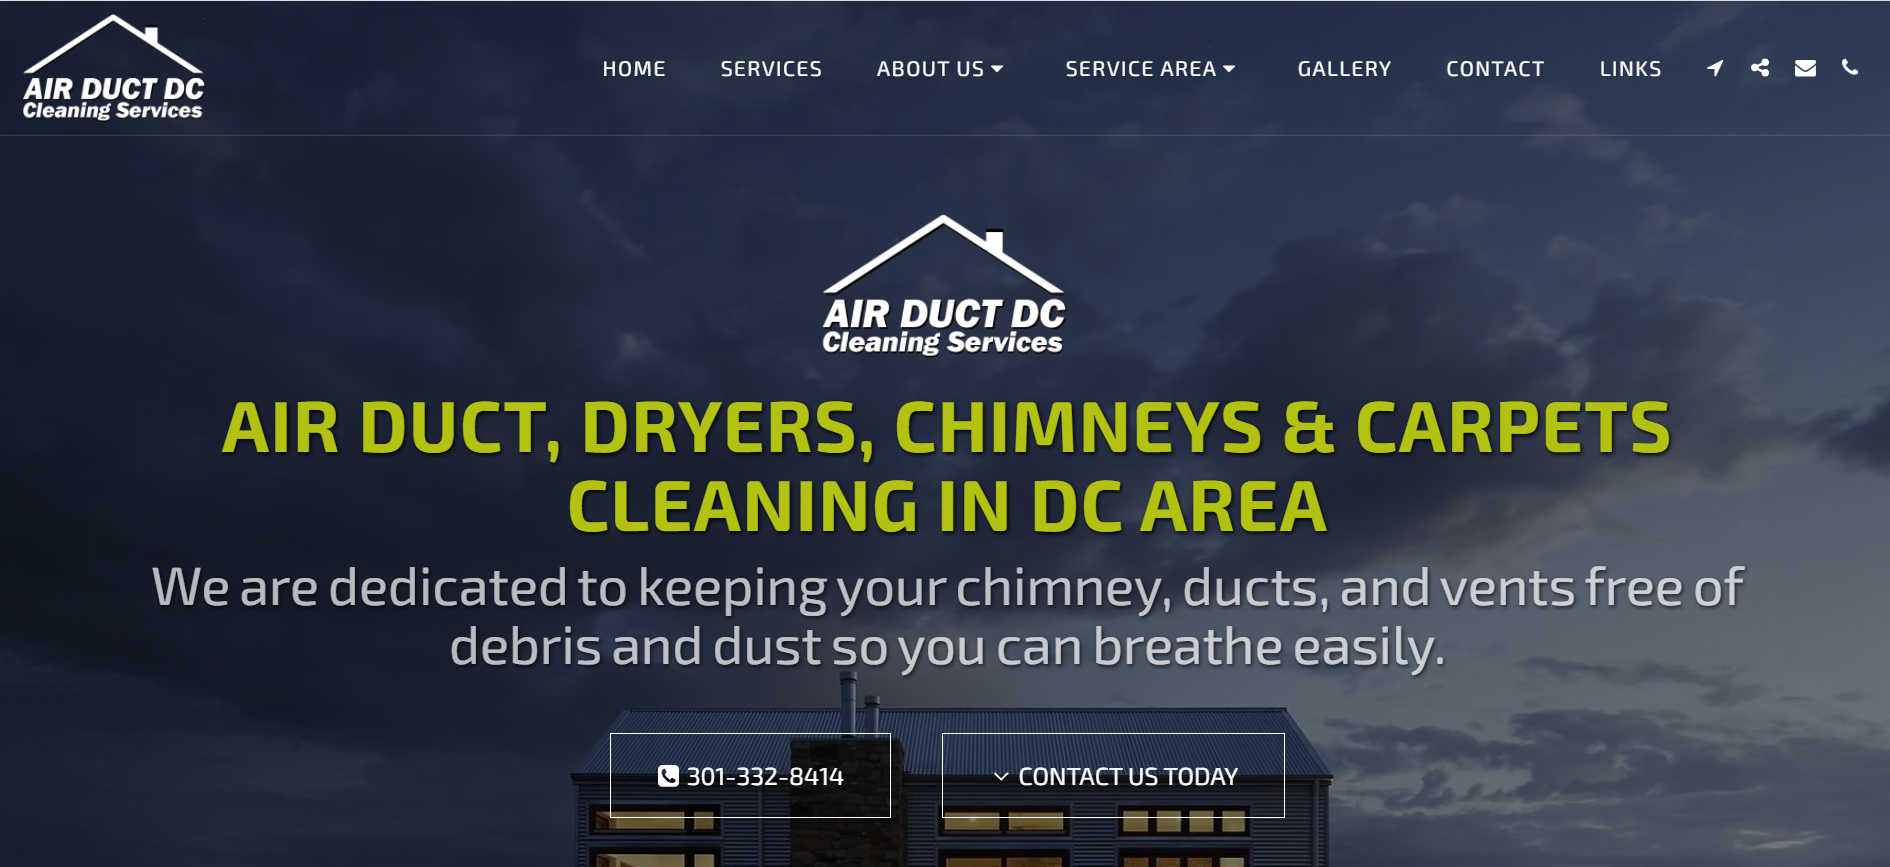 Airduct DC